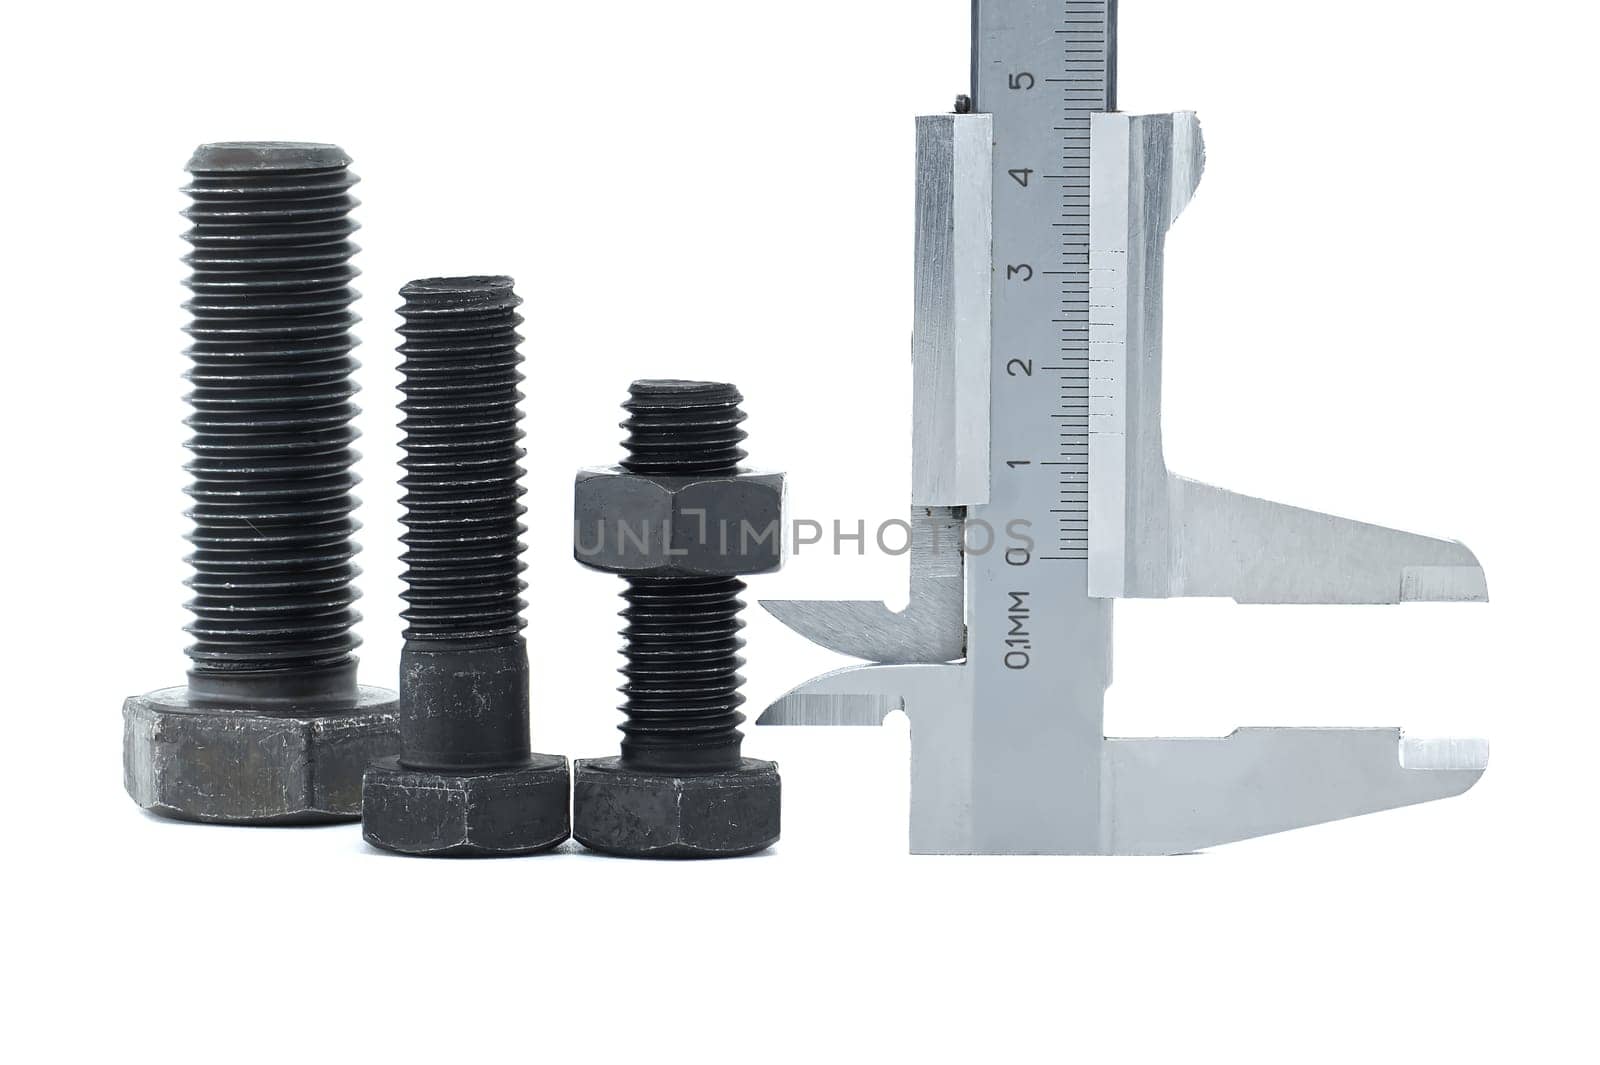 Hex head bolt and nut measured by a Vernier caliper isolated on white background. The caliper is being used to gauge the external diameter of the bolt